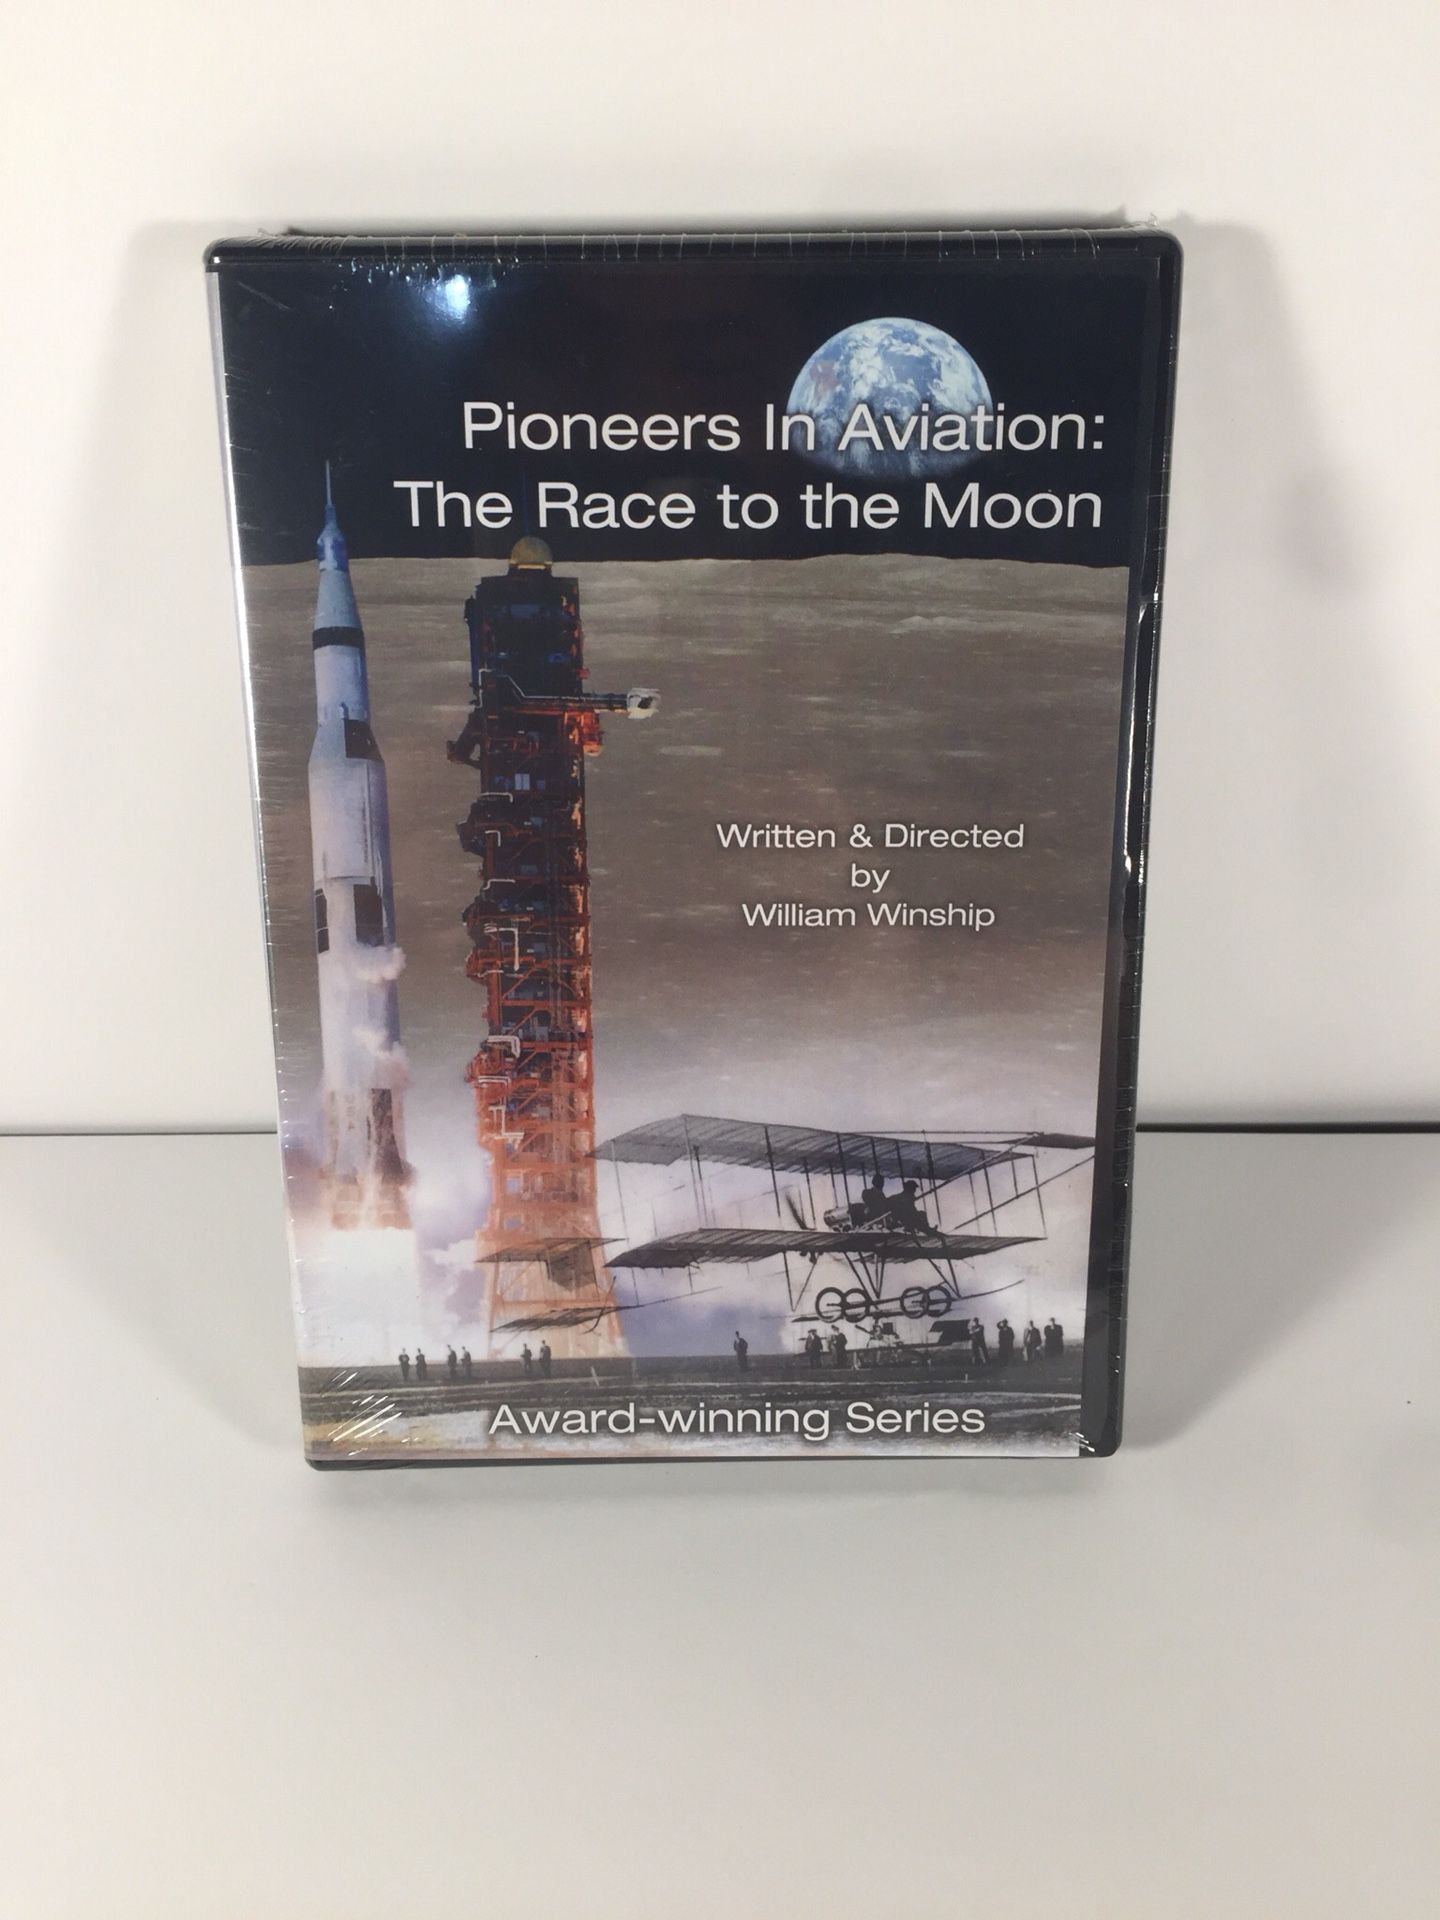 Pioneers in aviation: the race to the moon dvd Movie documentary by William winship